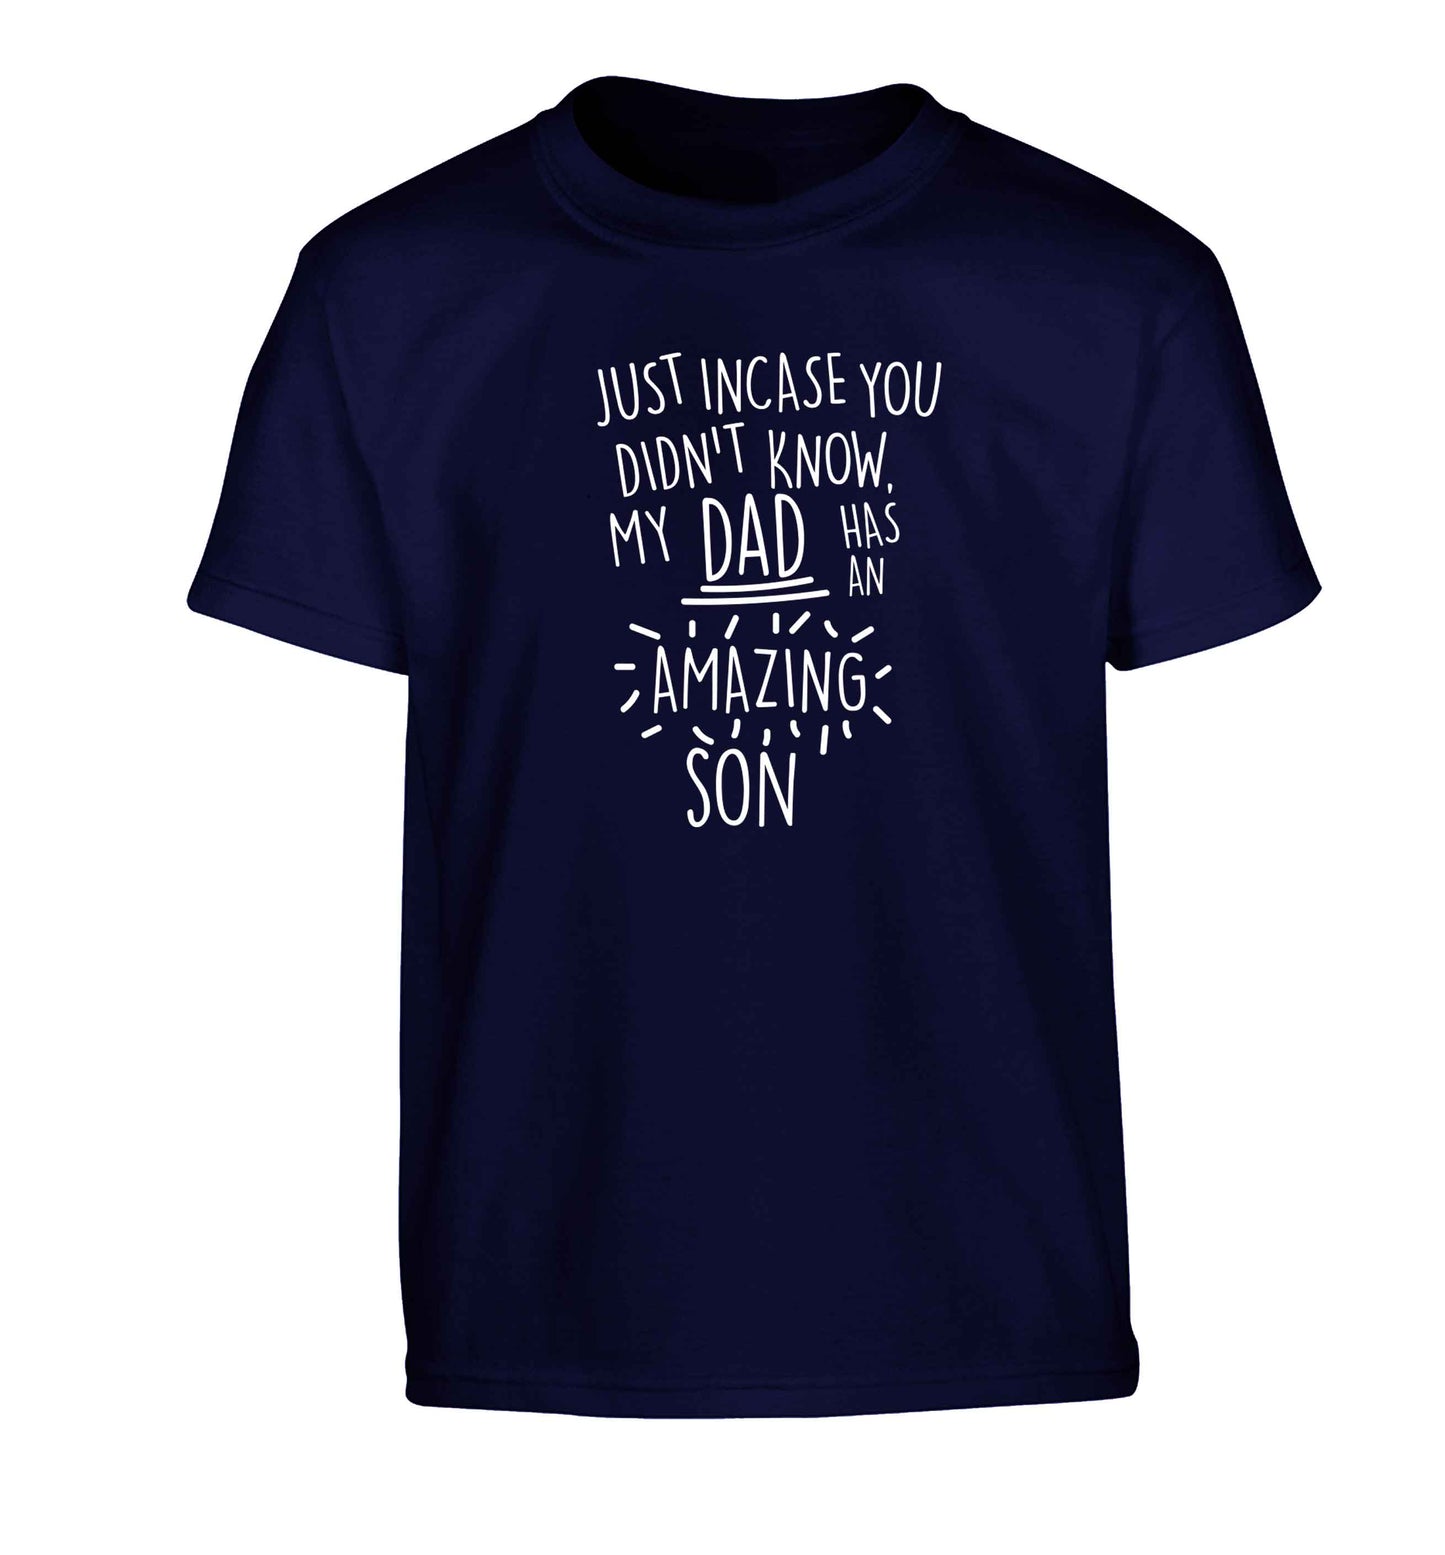 Just incase you didn't know my dad has an amazing son Children's navy Tshirt 12-13 Years